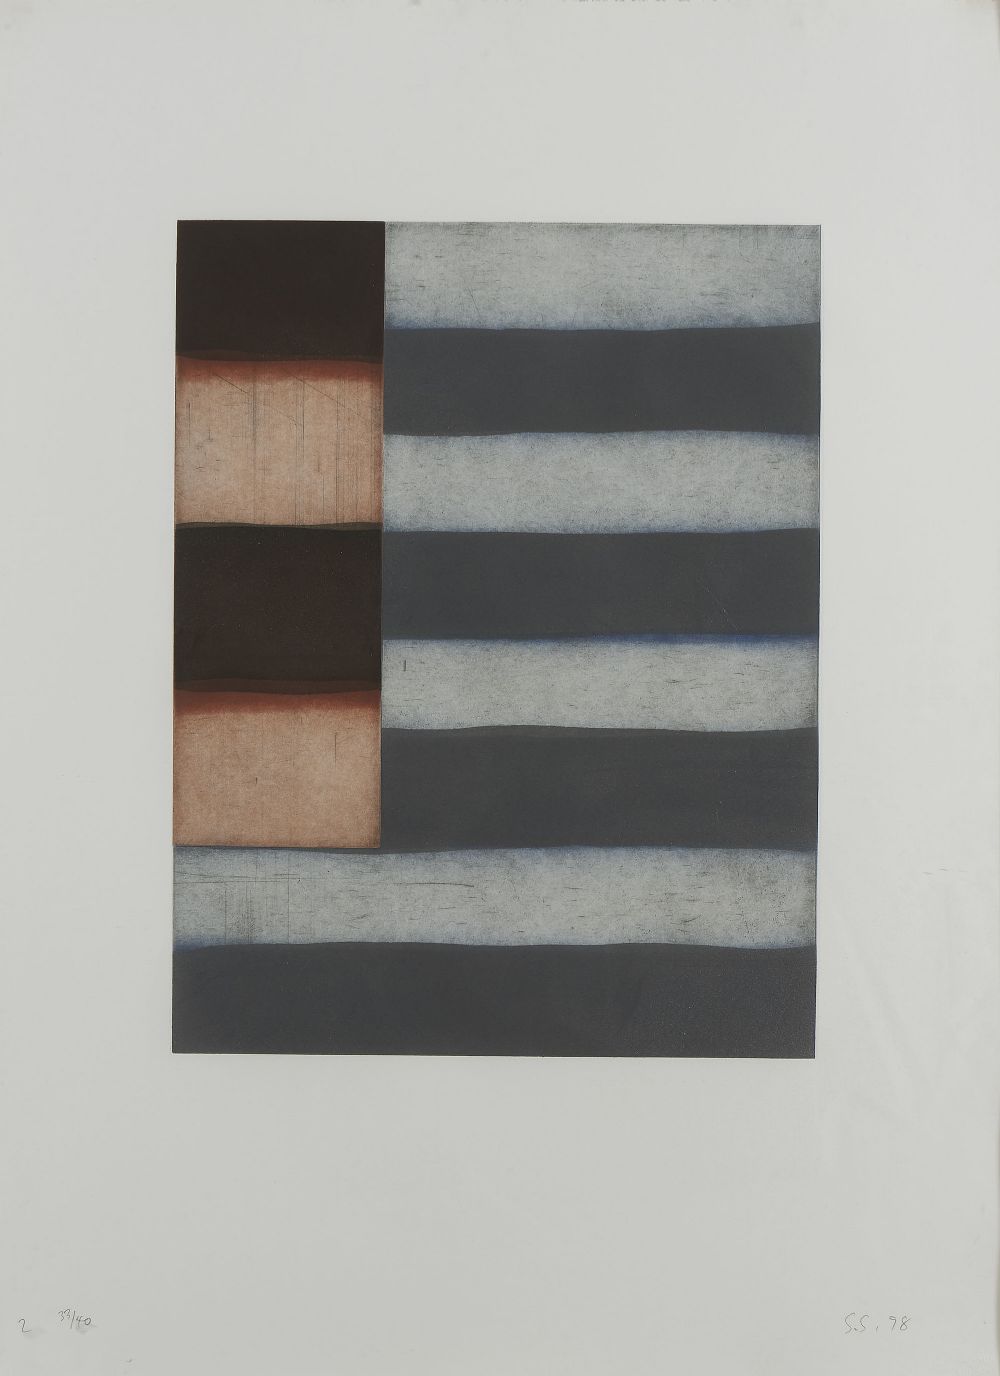 Lot 67 - ENTER SIX (No. 6) by Sean Scully